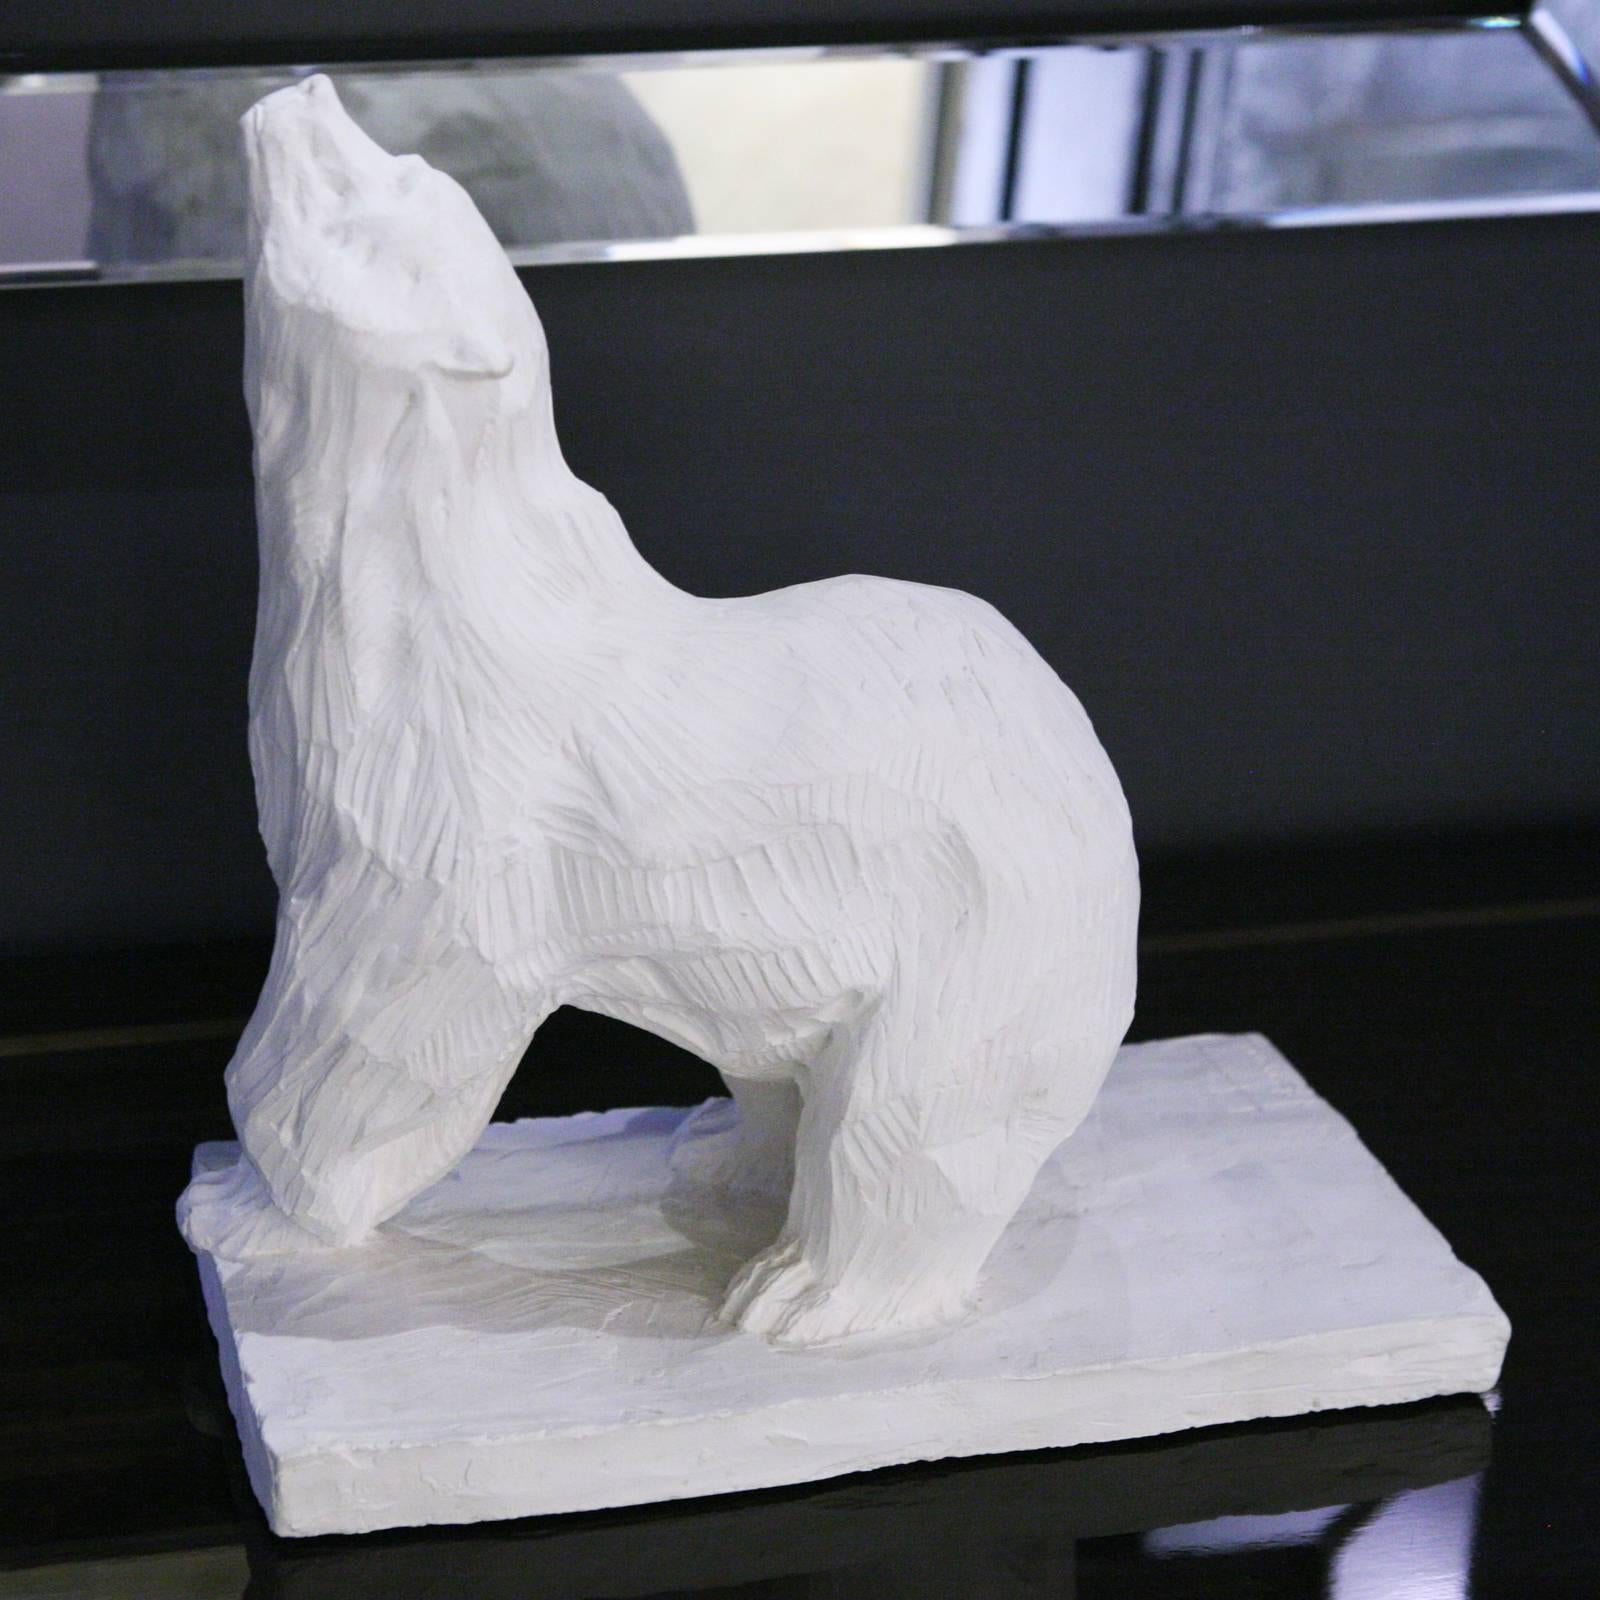 Sculpture bear in plaster.
Limited and numerated edition 60/100.
Made in France By J.B Vandame in 2015.
 